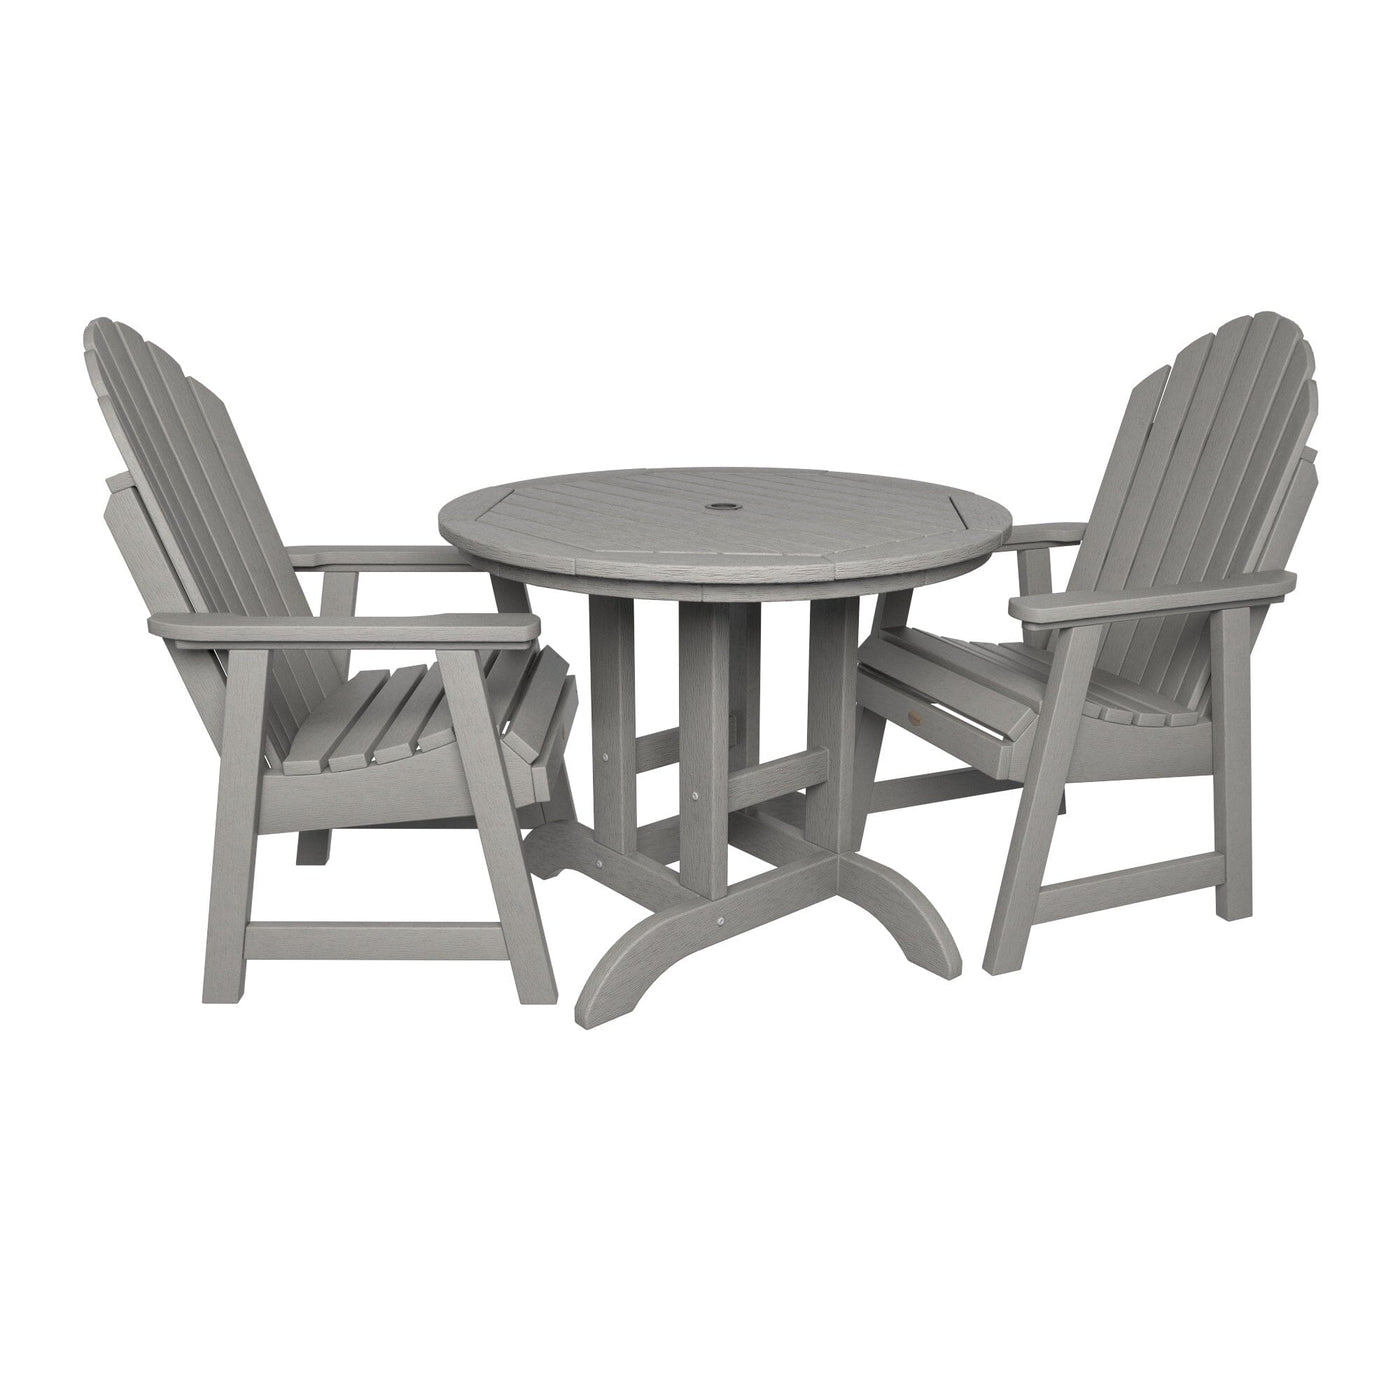 Hamilton 3pc 36in Round Dining Set - Dining Height Dining Highwood USA Harbor Gray 